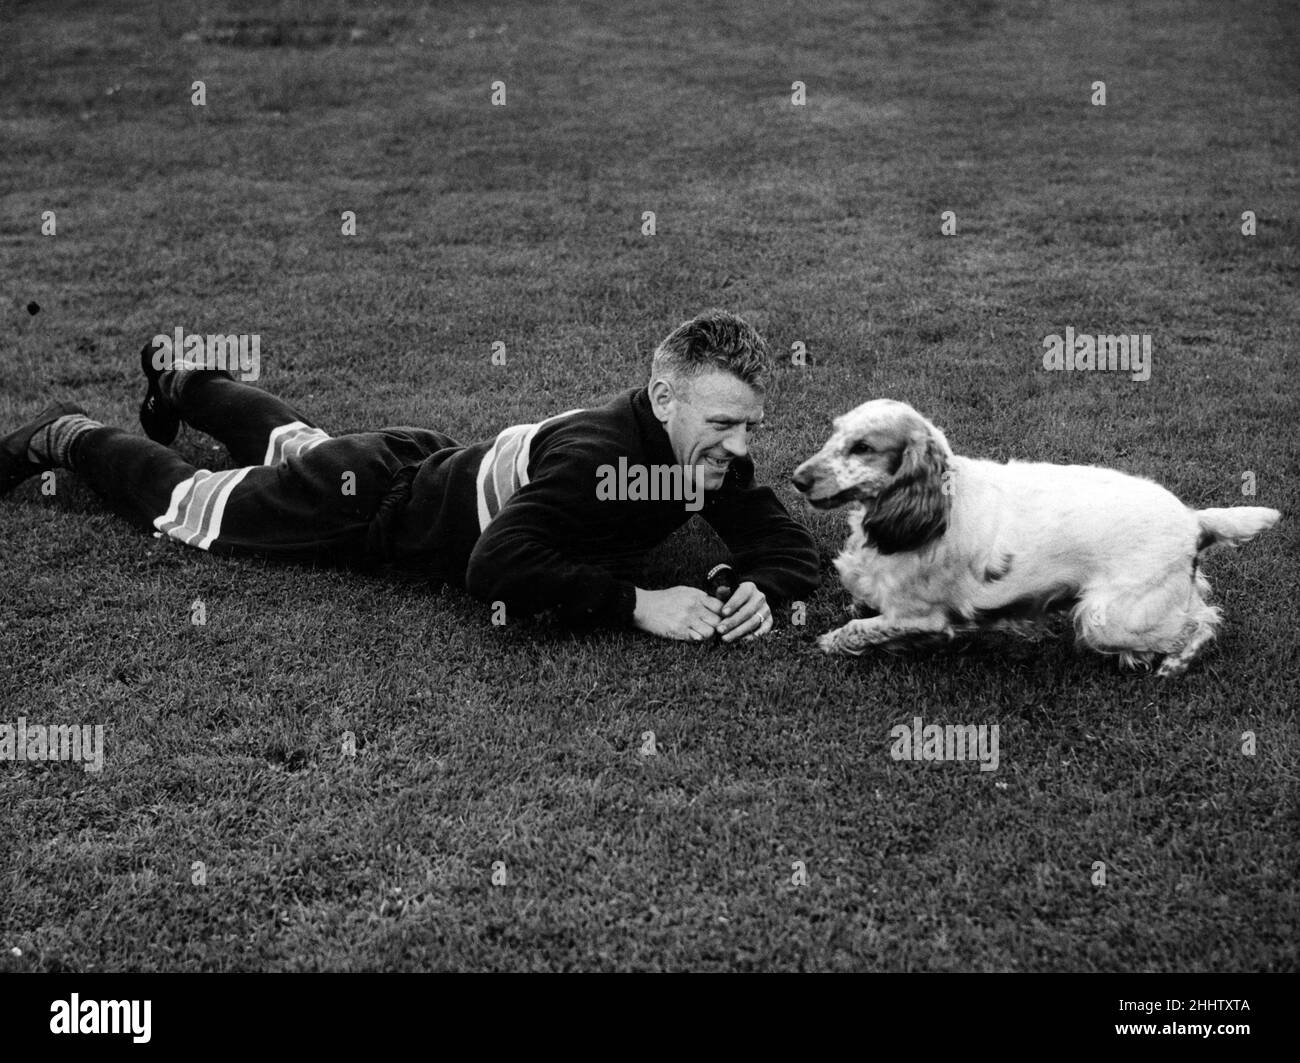 Jock Shaw had a wrestle with Sandy after training and the way he is getting off his mark proves the 'Tiger' won. 21st July 1953. Stock Photo